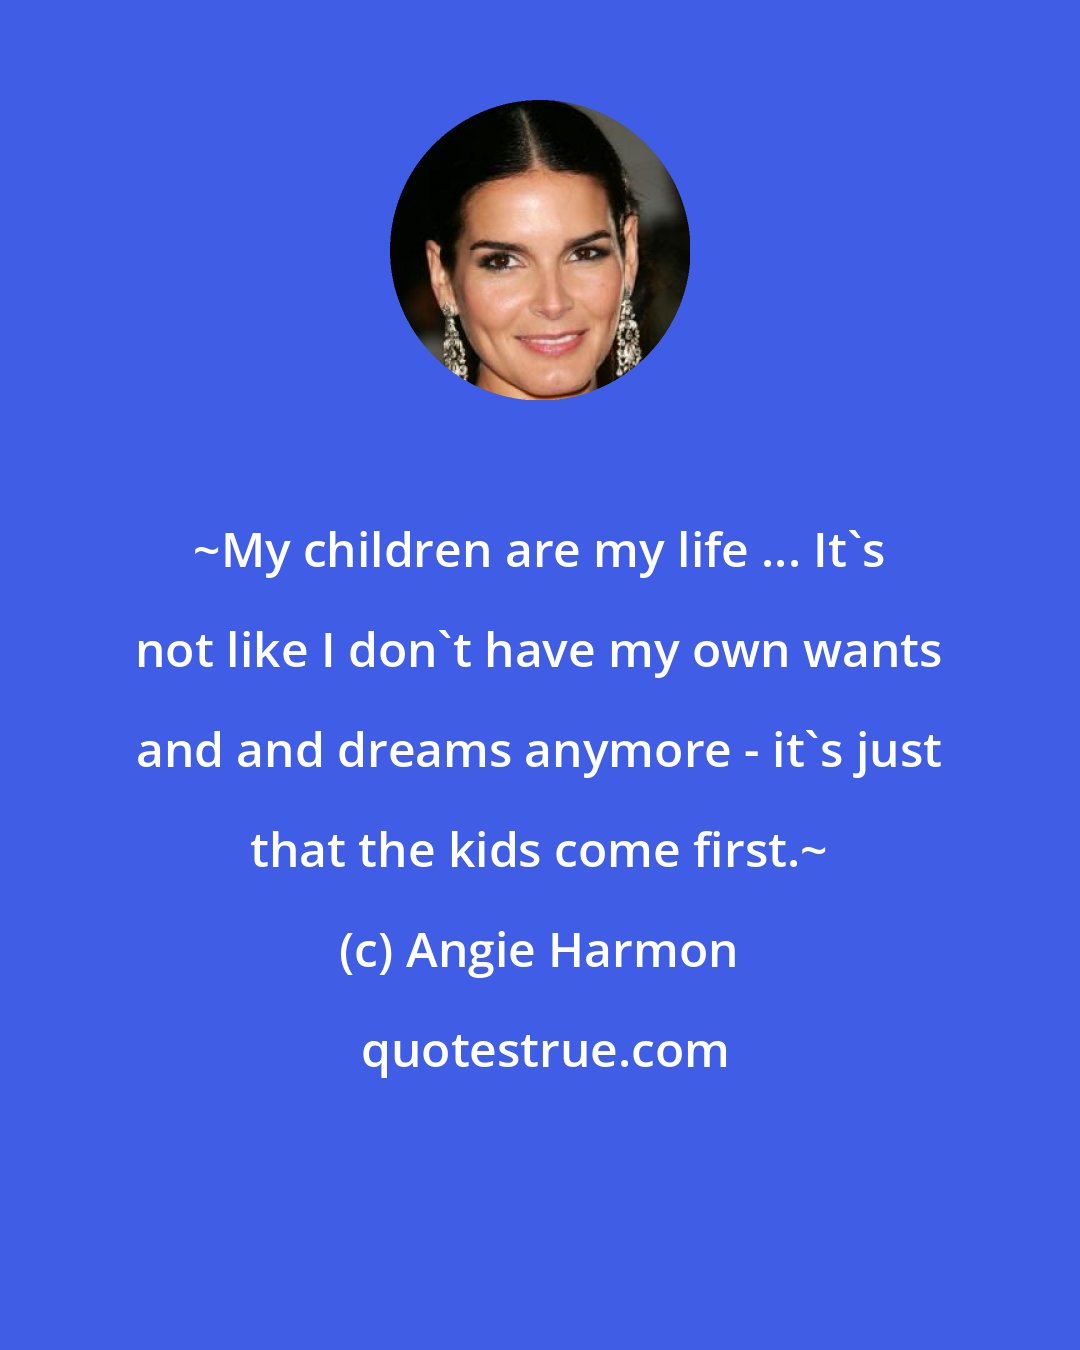 Angie Harmon: ~My children are my life ... It's not like I don't have my own wants and and dreams anymore - it's just that the kids come first.~